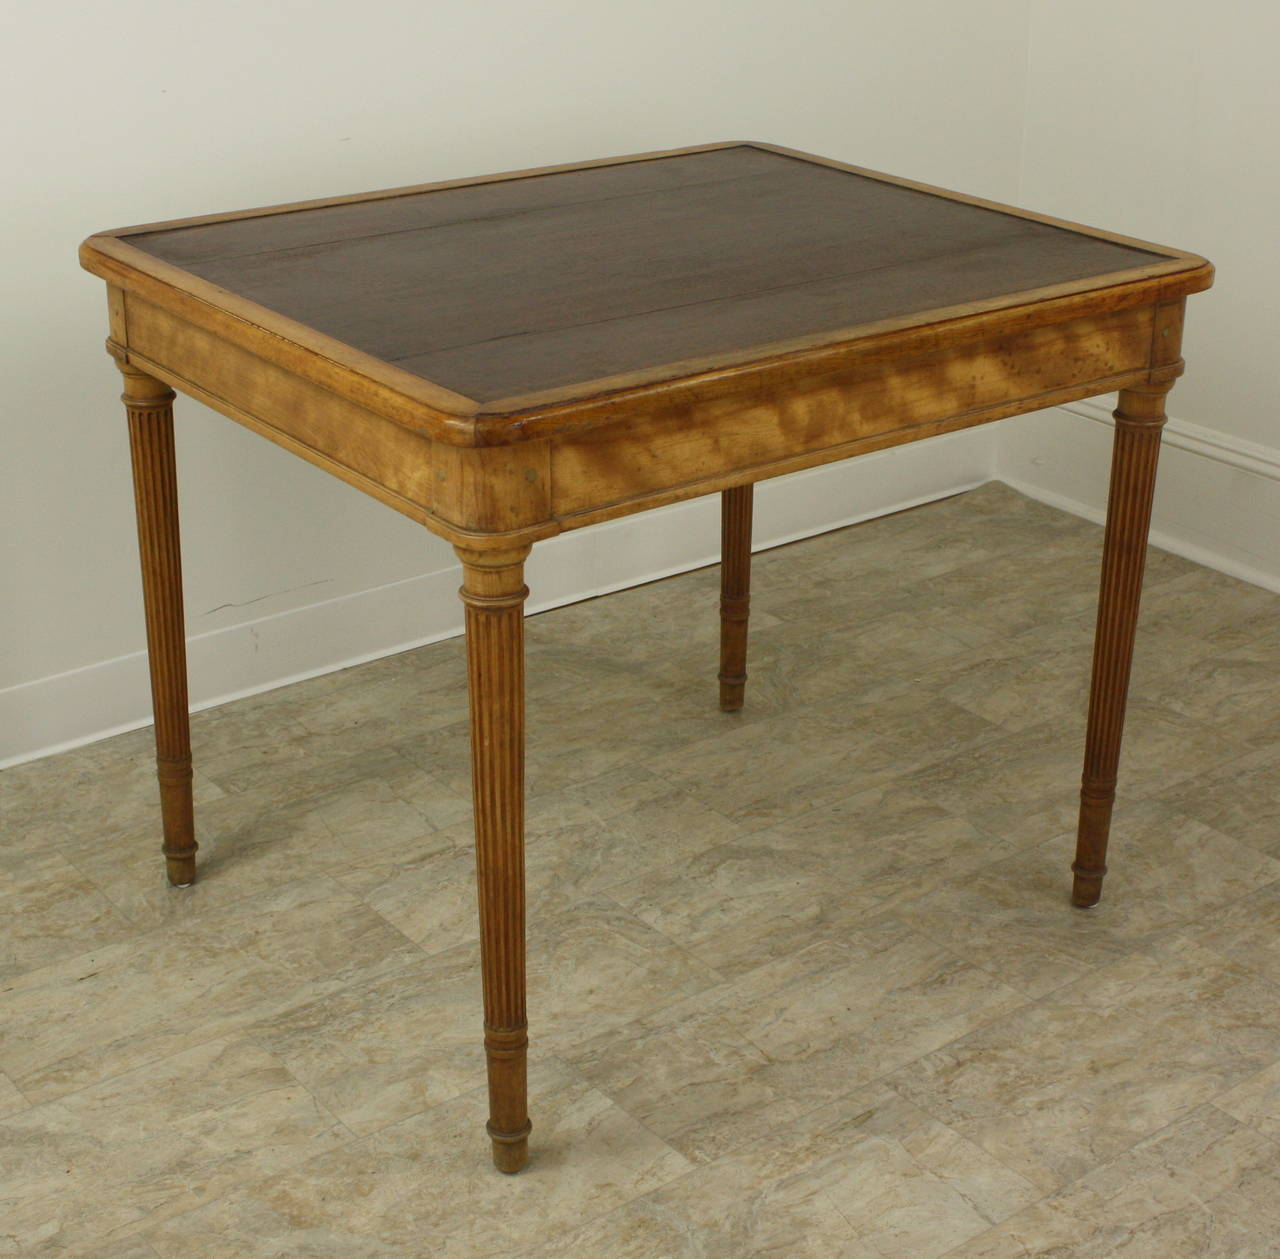 A very handsome writing table. The wood is beautiful, well-grained, and finished in a warm glow. The carved reeded legs, ending in a finished barrel shape, are elegant yet simple. Depending on size requirements, this might work anywhere in the home.